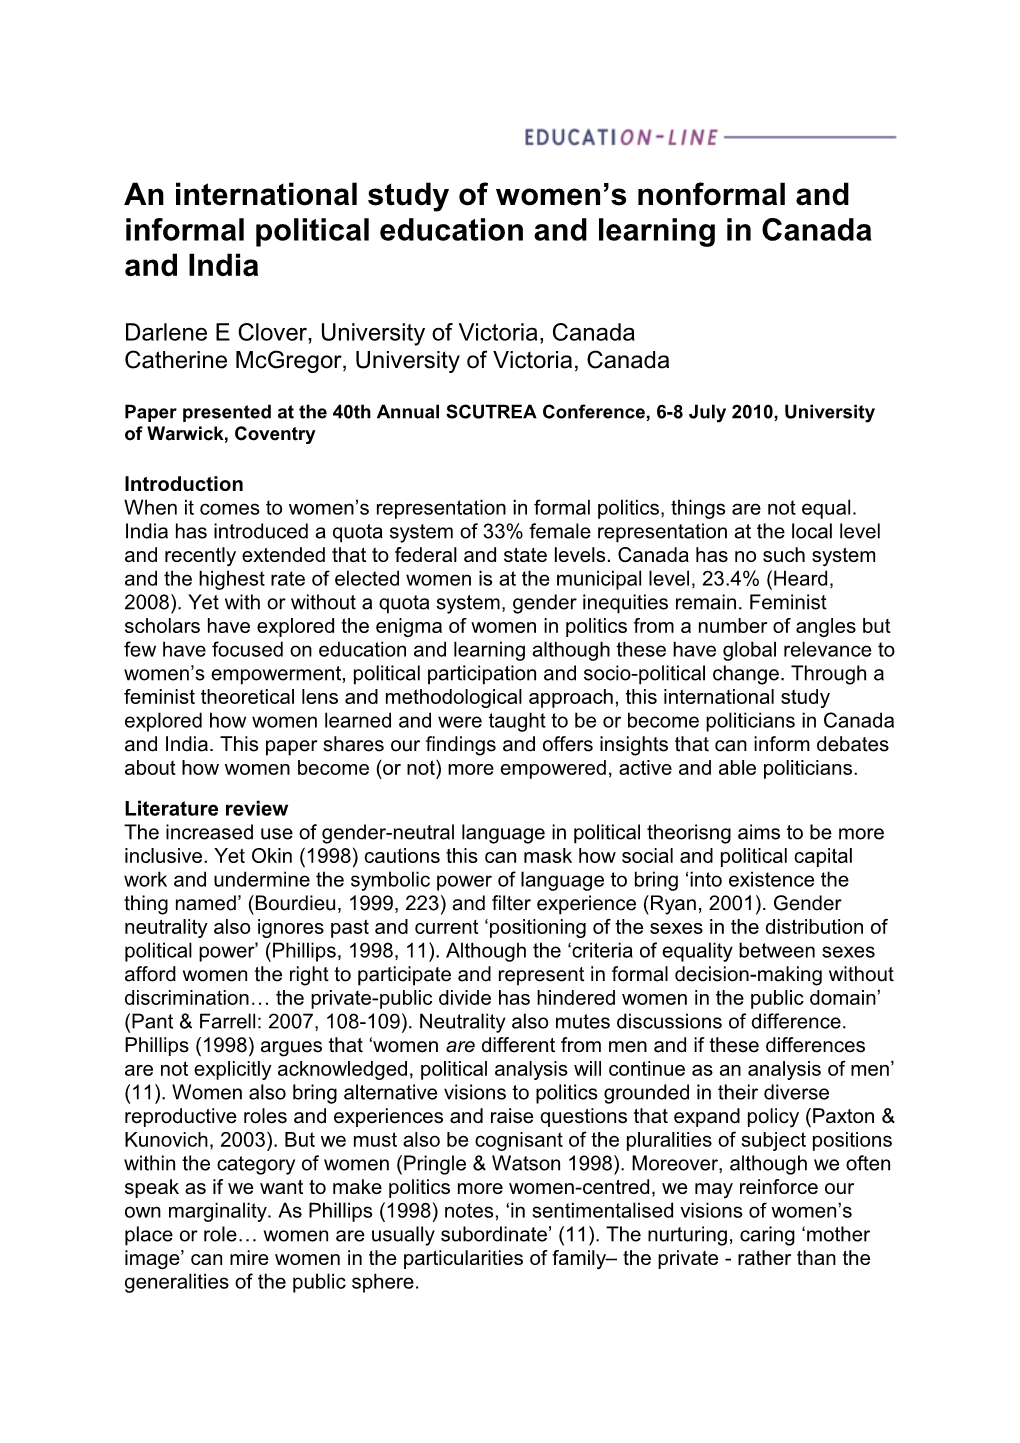 An International Study of Women S Nonformal and Informal Political Education and Learning